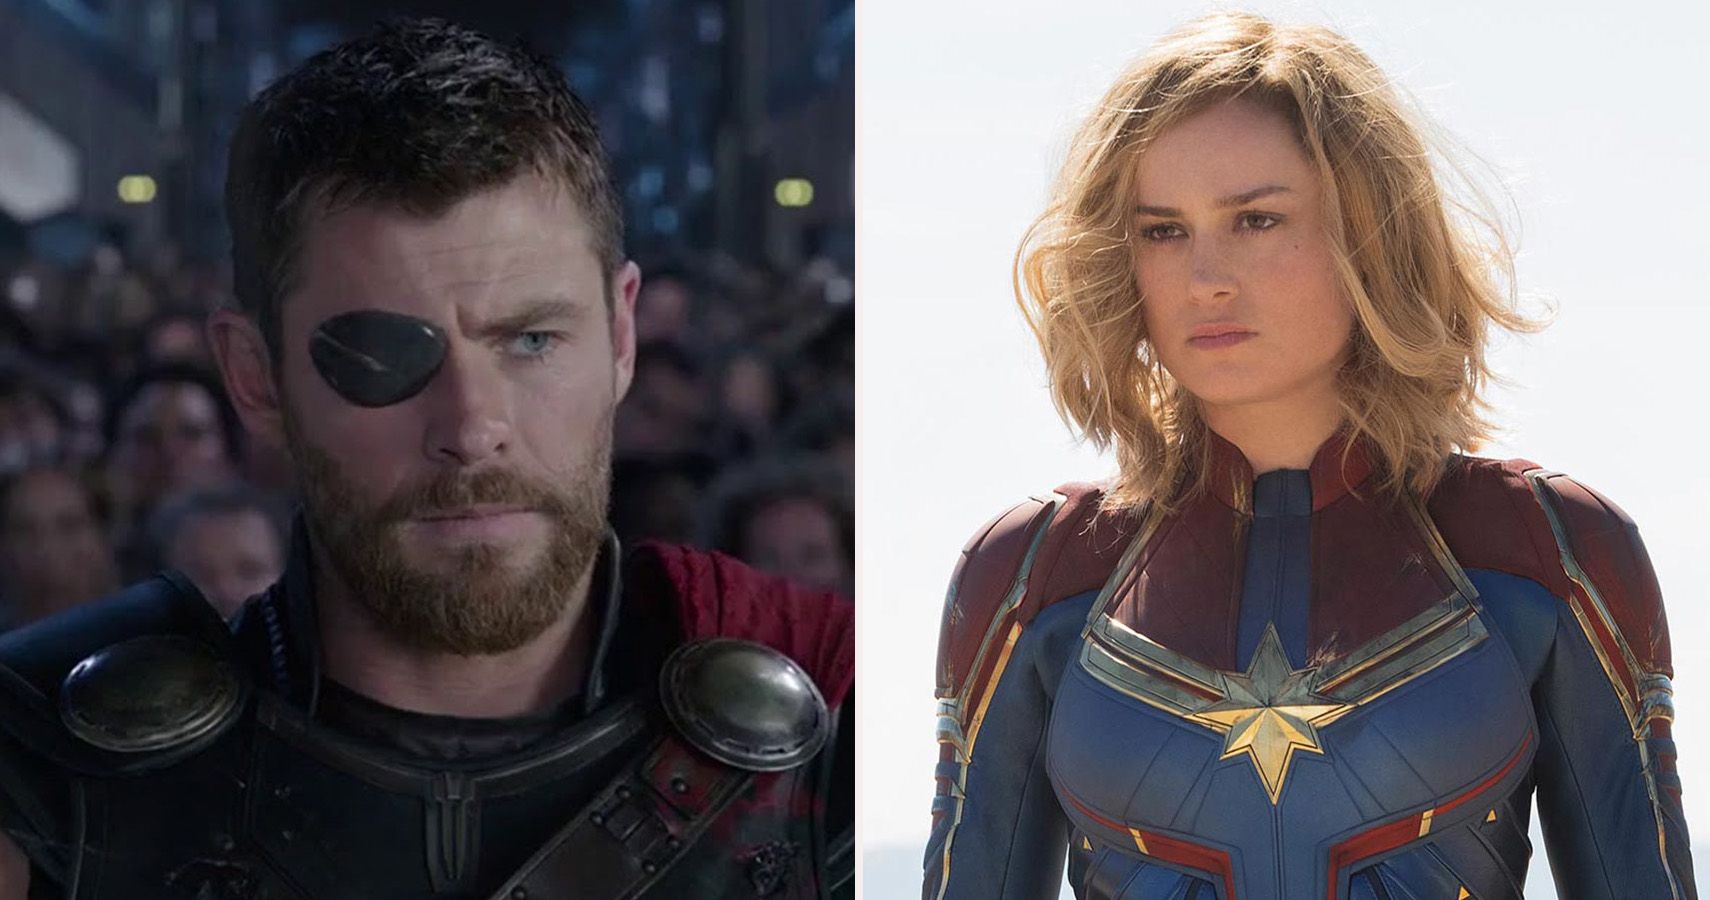 Thor Vs Captain Marvel: Who Really Is The Most Powerful Hero In The MCU?